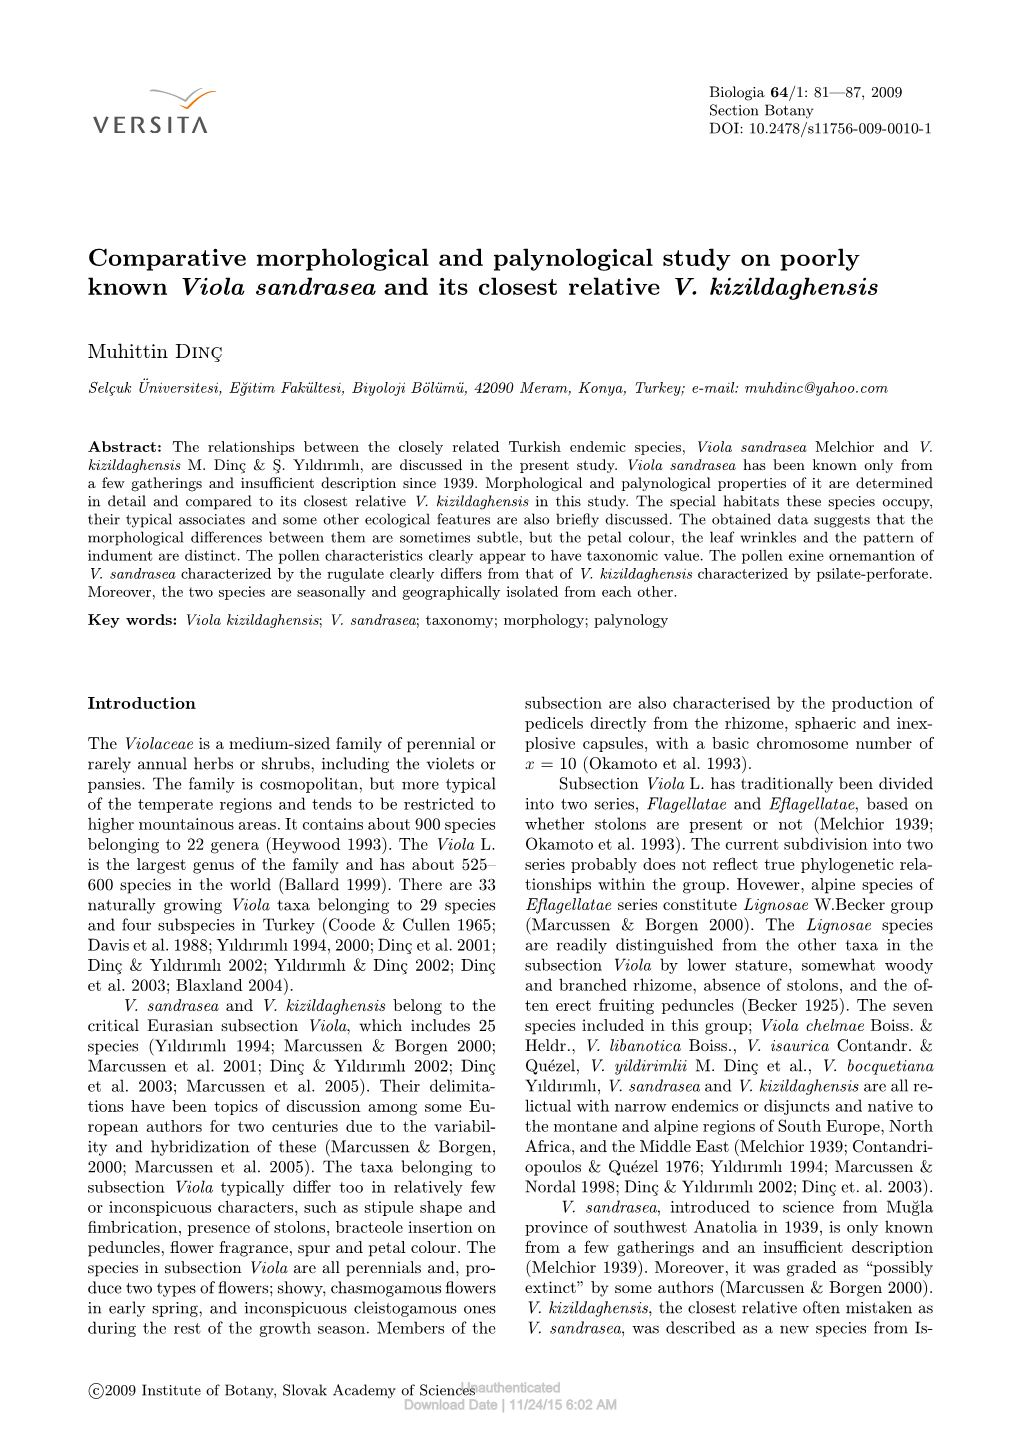 Comparative Morphological and Palynological Study on Poorly Known Viola Sandrasea and Its Closest Relative V